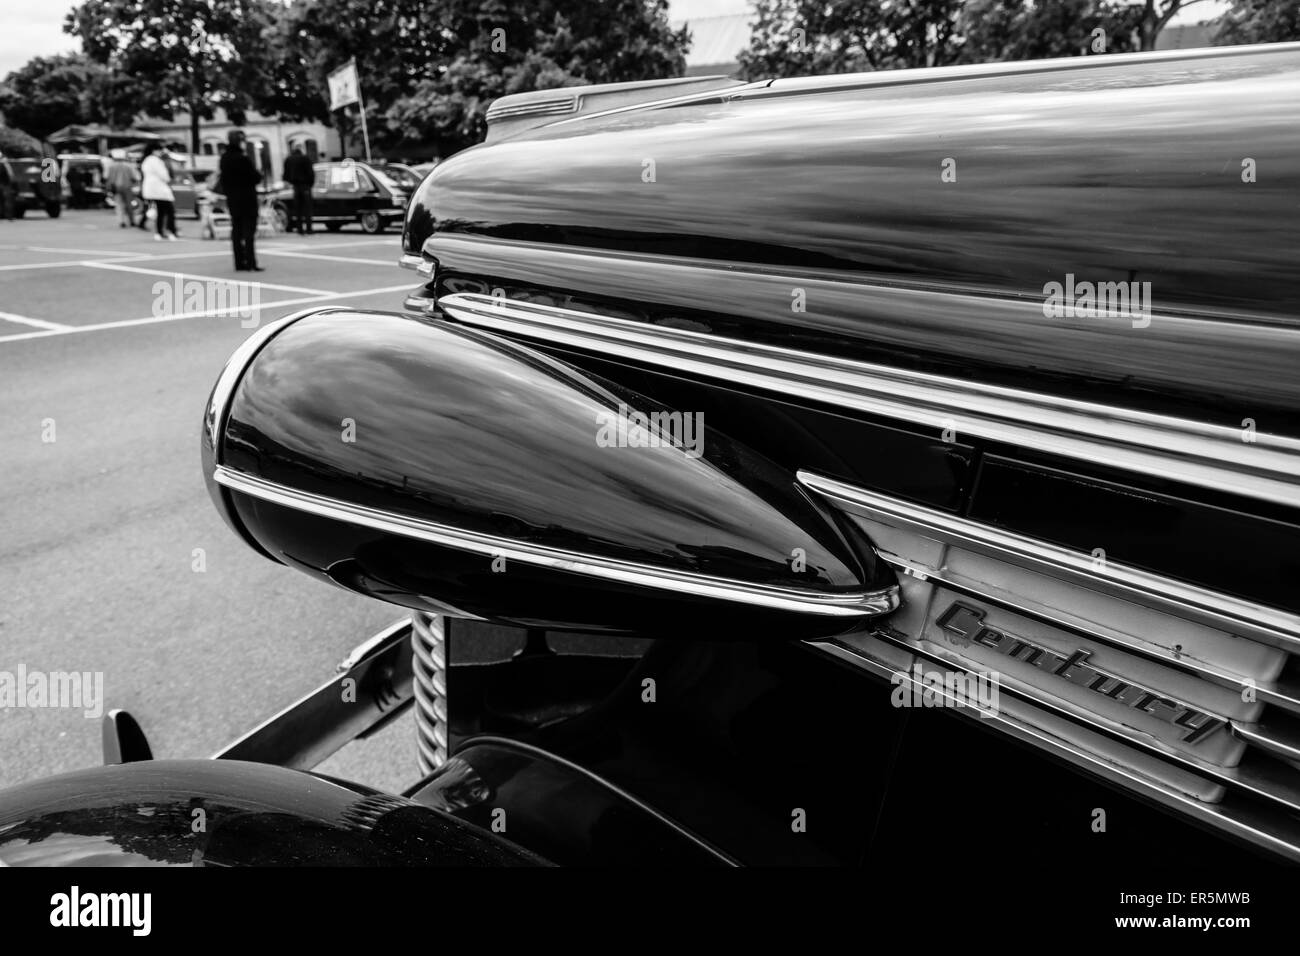 BERLIN - MAY 10, 2015: Fragment of a full-size car Buick Century, 1938. Black and white. 28th Berlin-Brandenburg Oldtimer Day Stock Photo